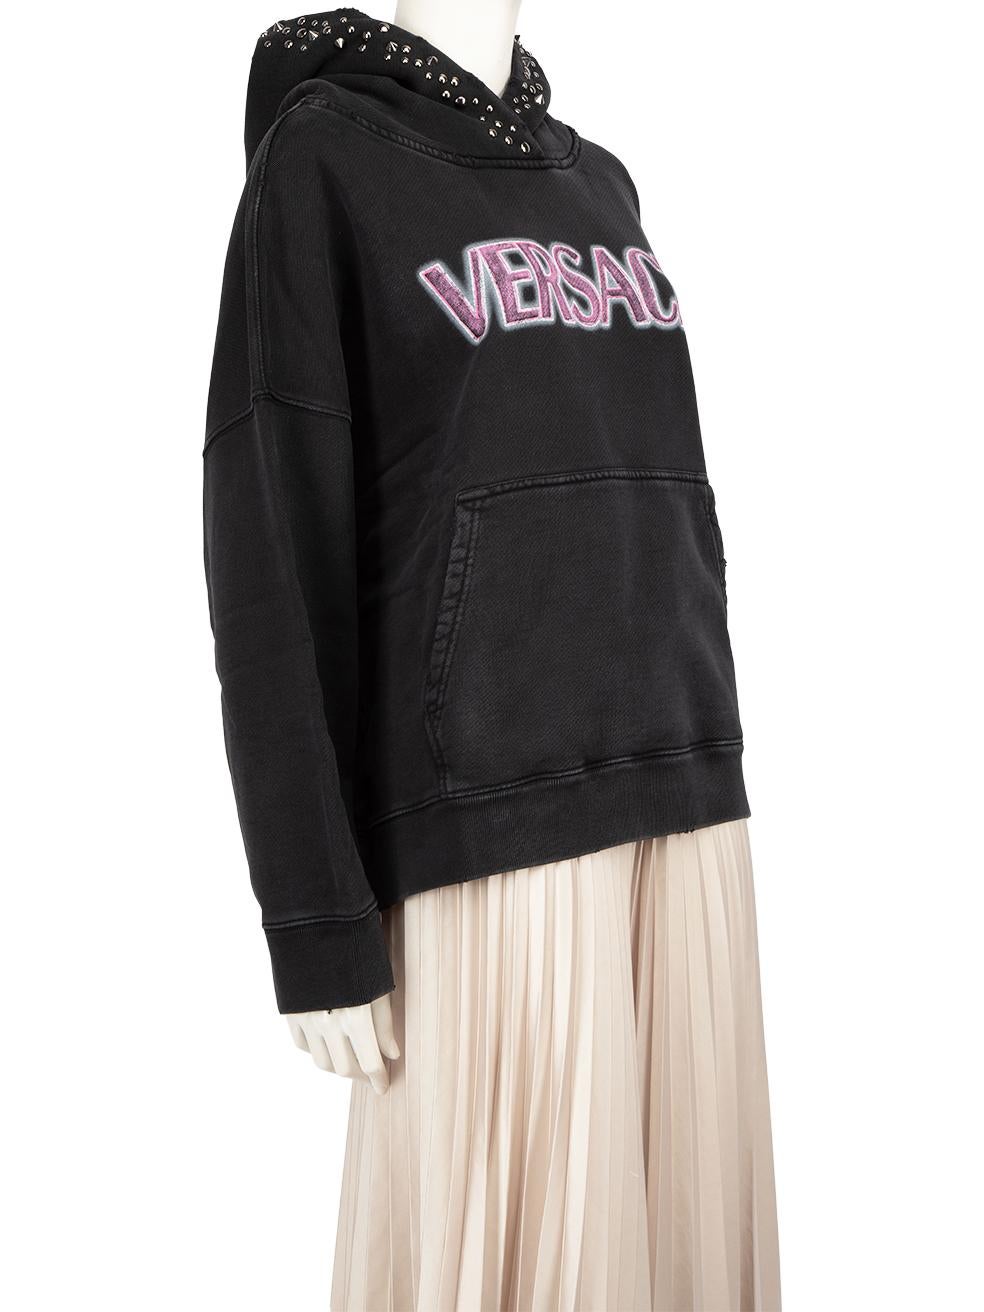 CONDITION is New with tags on this brand new Versace designer item. This item comes with original packaging.
 
 
 
 Details
 
 
 Model: 1008170
 
 Season: FW23
 
 Black
 
 Cotton
 
 Hoodie
 
 Vintage wash effect logo print
 
 Silver studded hood
 
